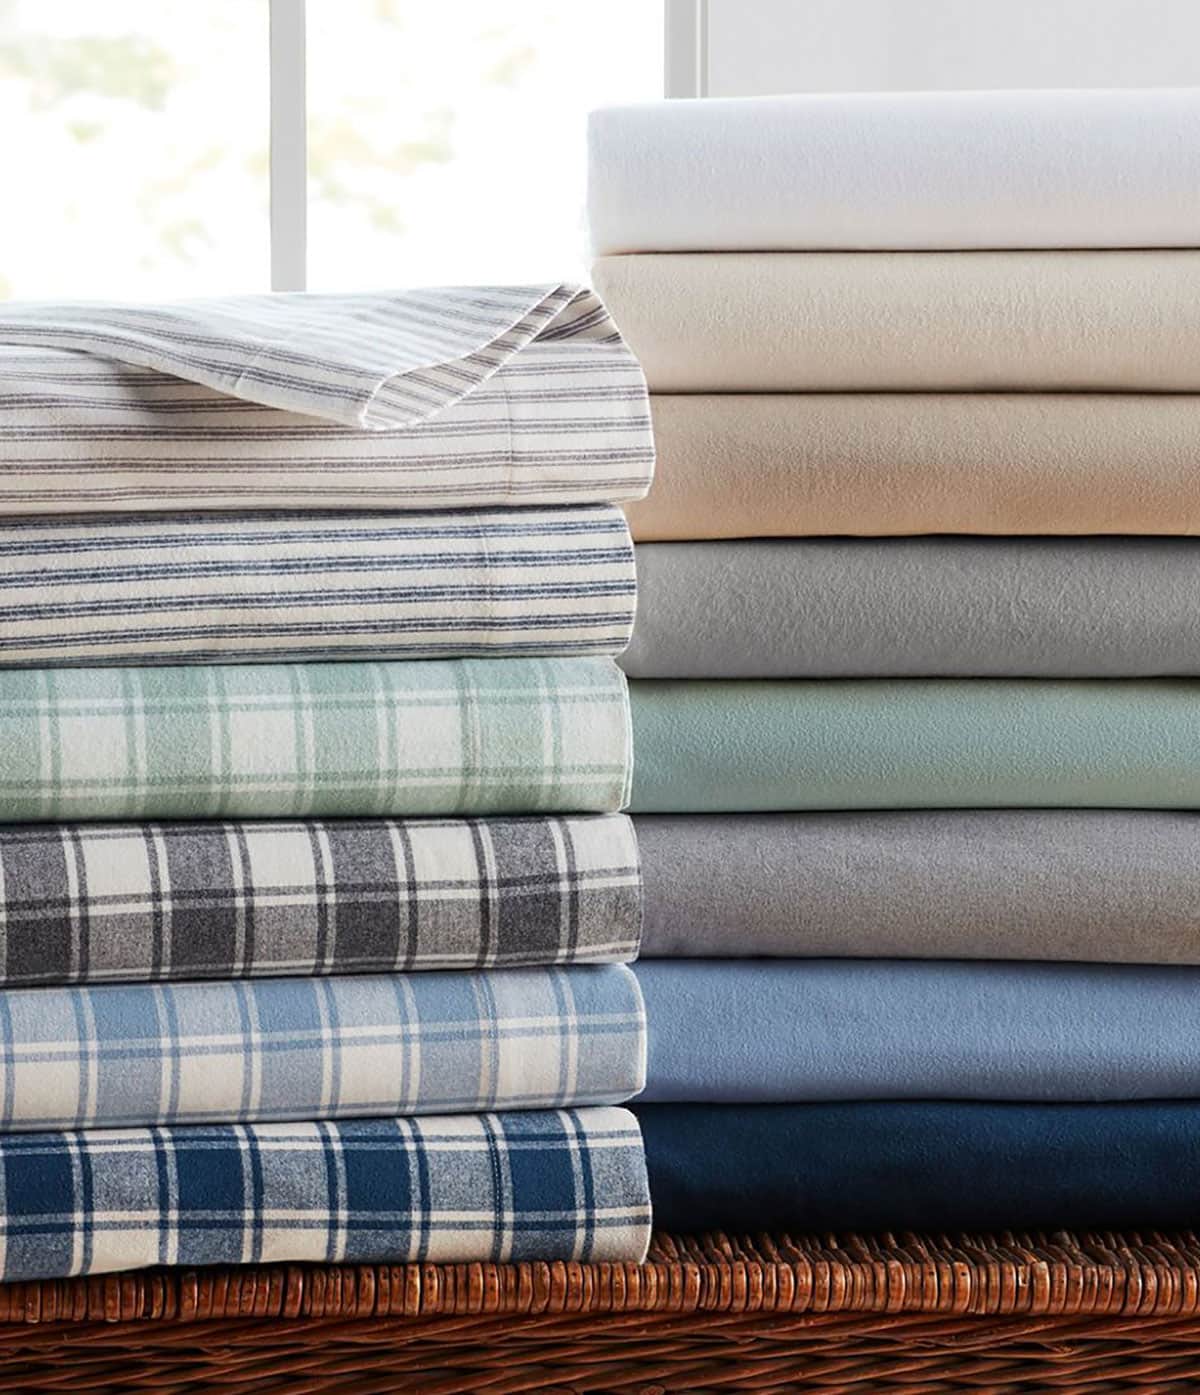 The Ultimate Guide to Washing Sateen Sheets for the First Time, by  homedesignidea